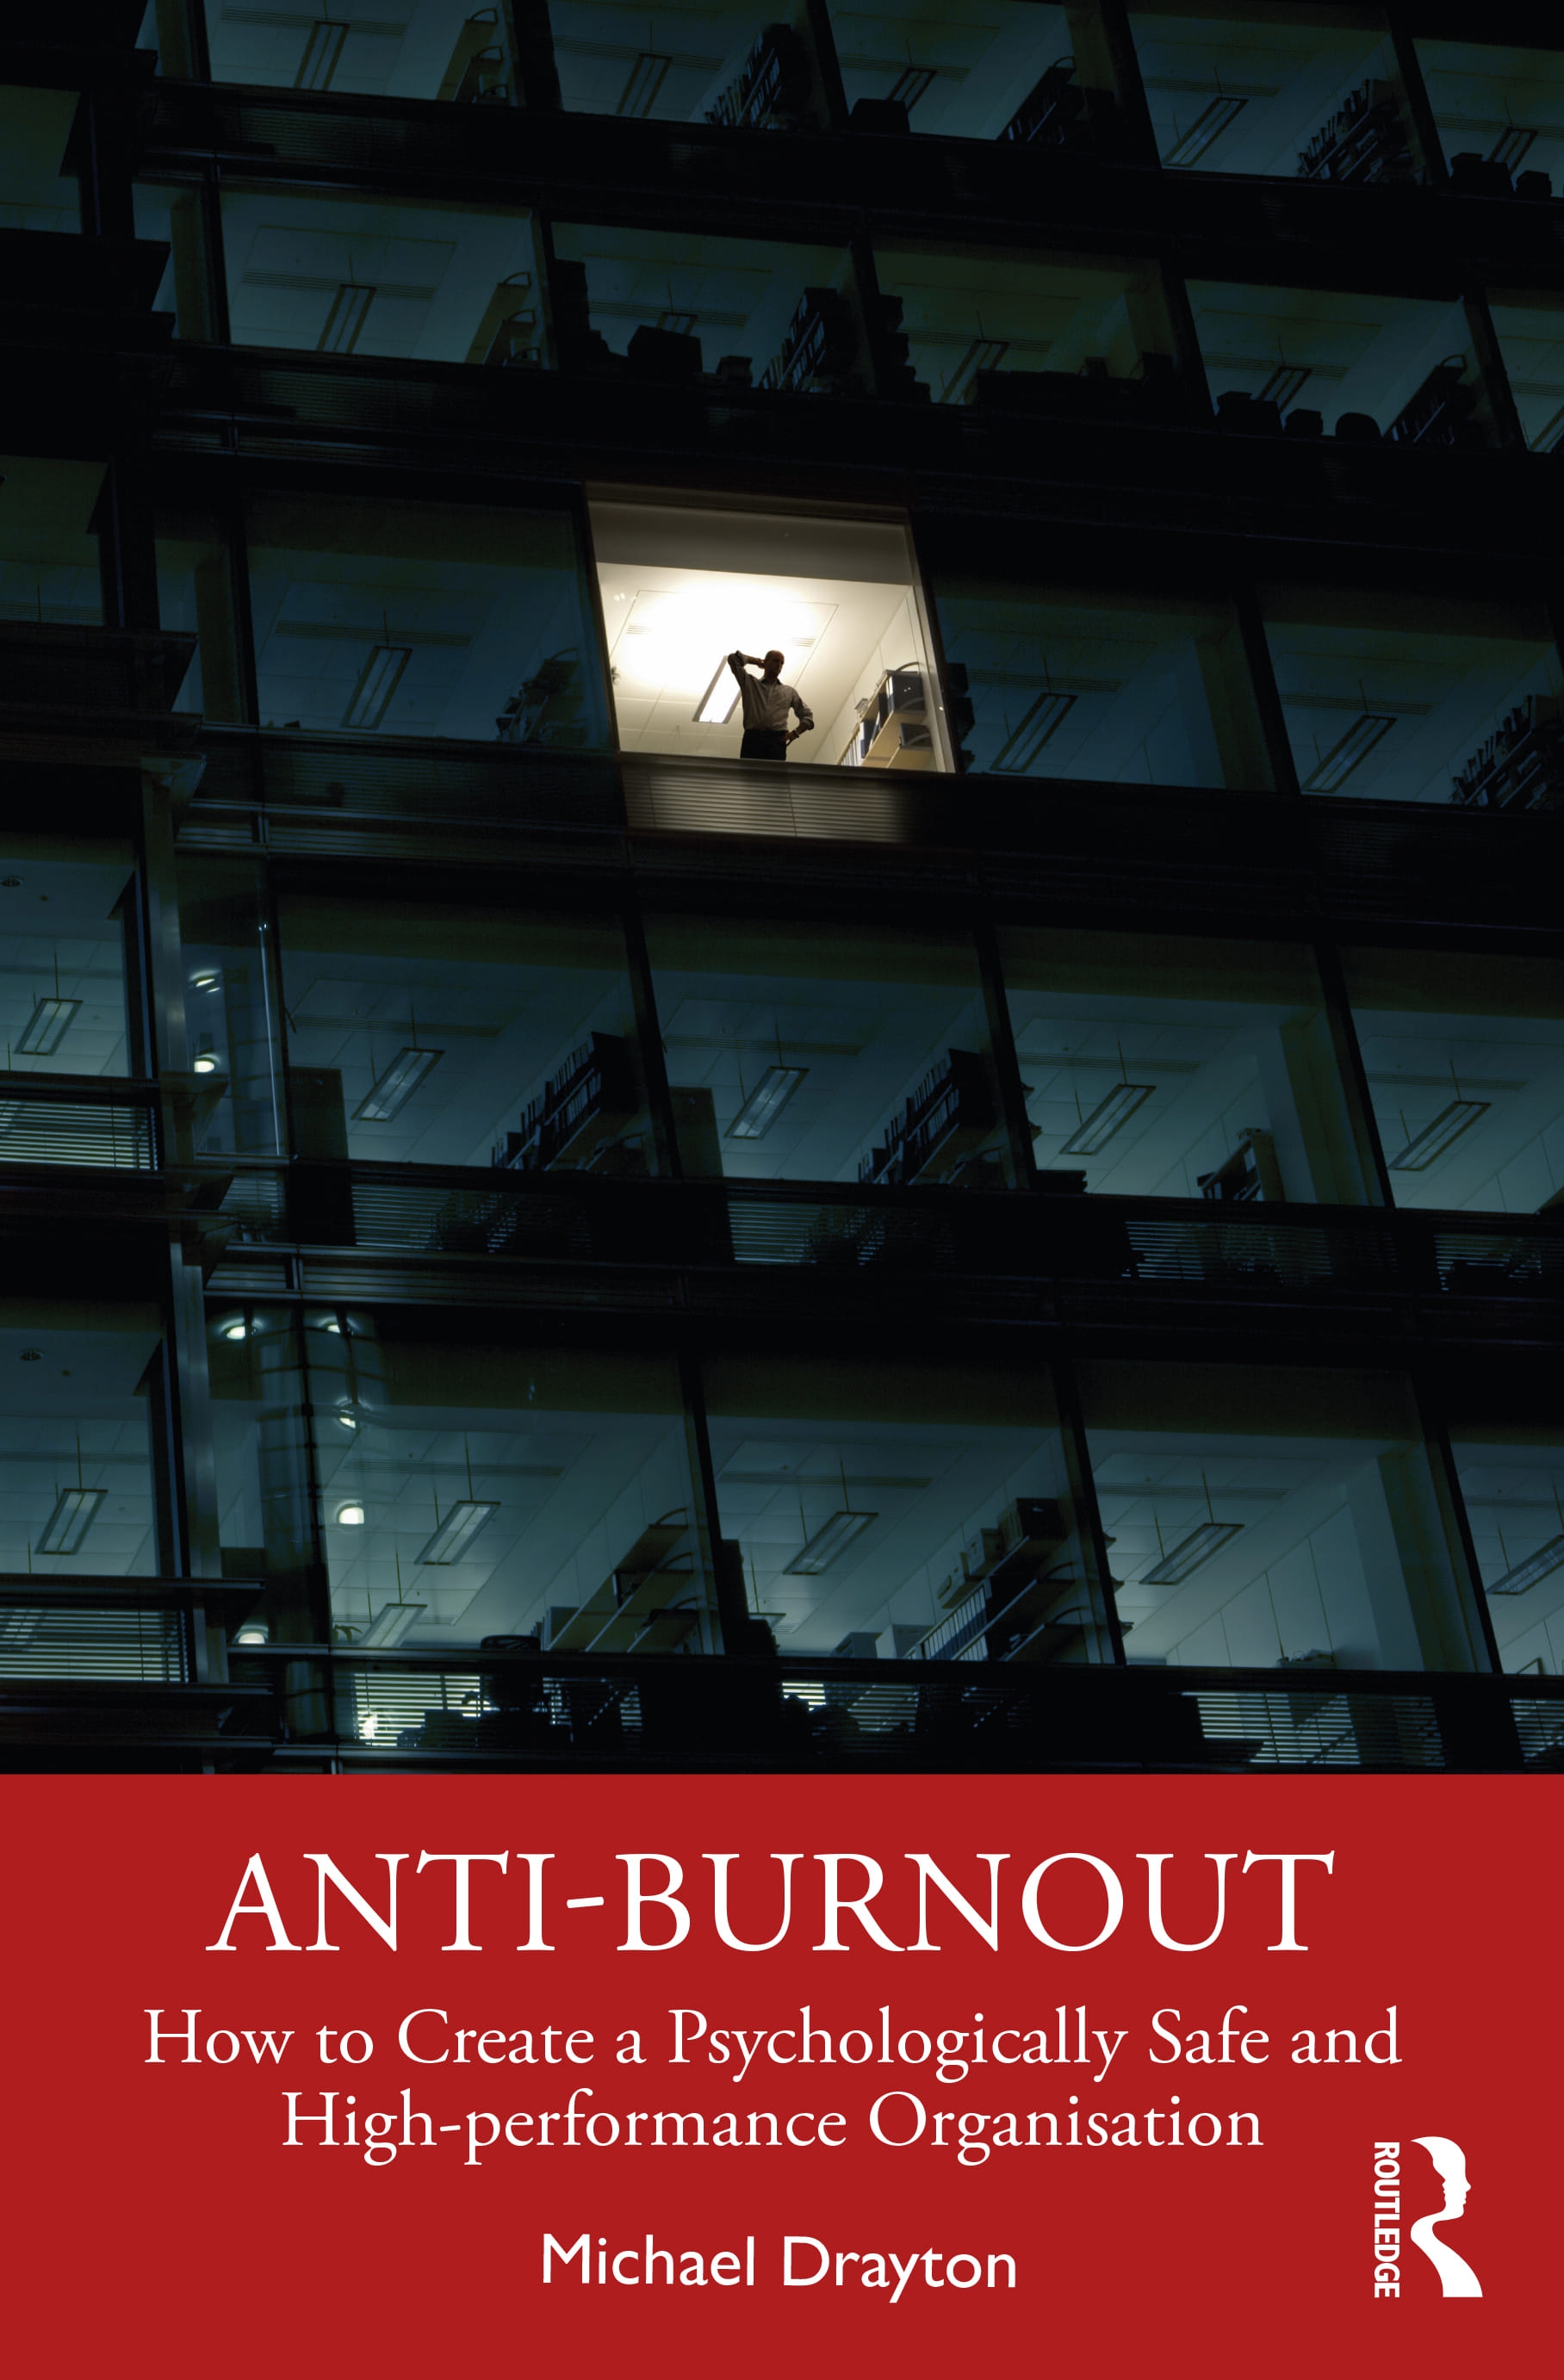 Anti-Burnout: How to Create a Psychologically Safe and High-Performance Organisation